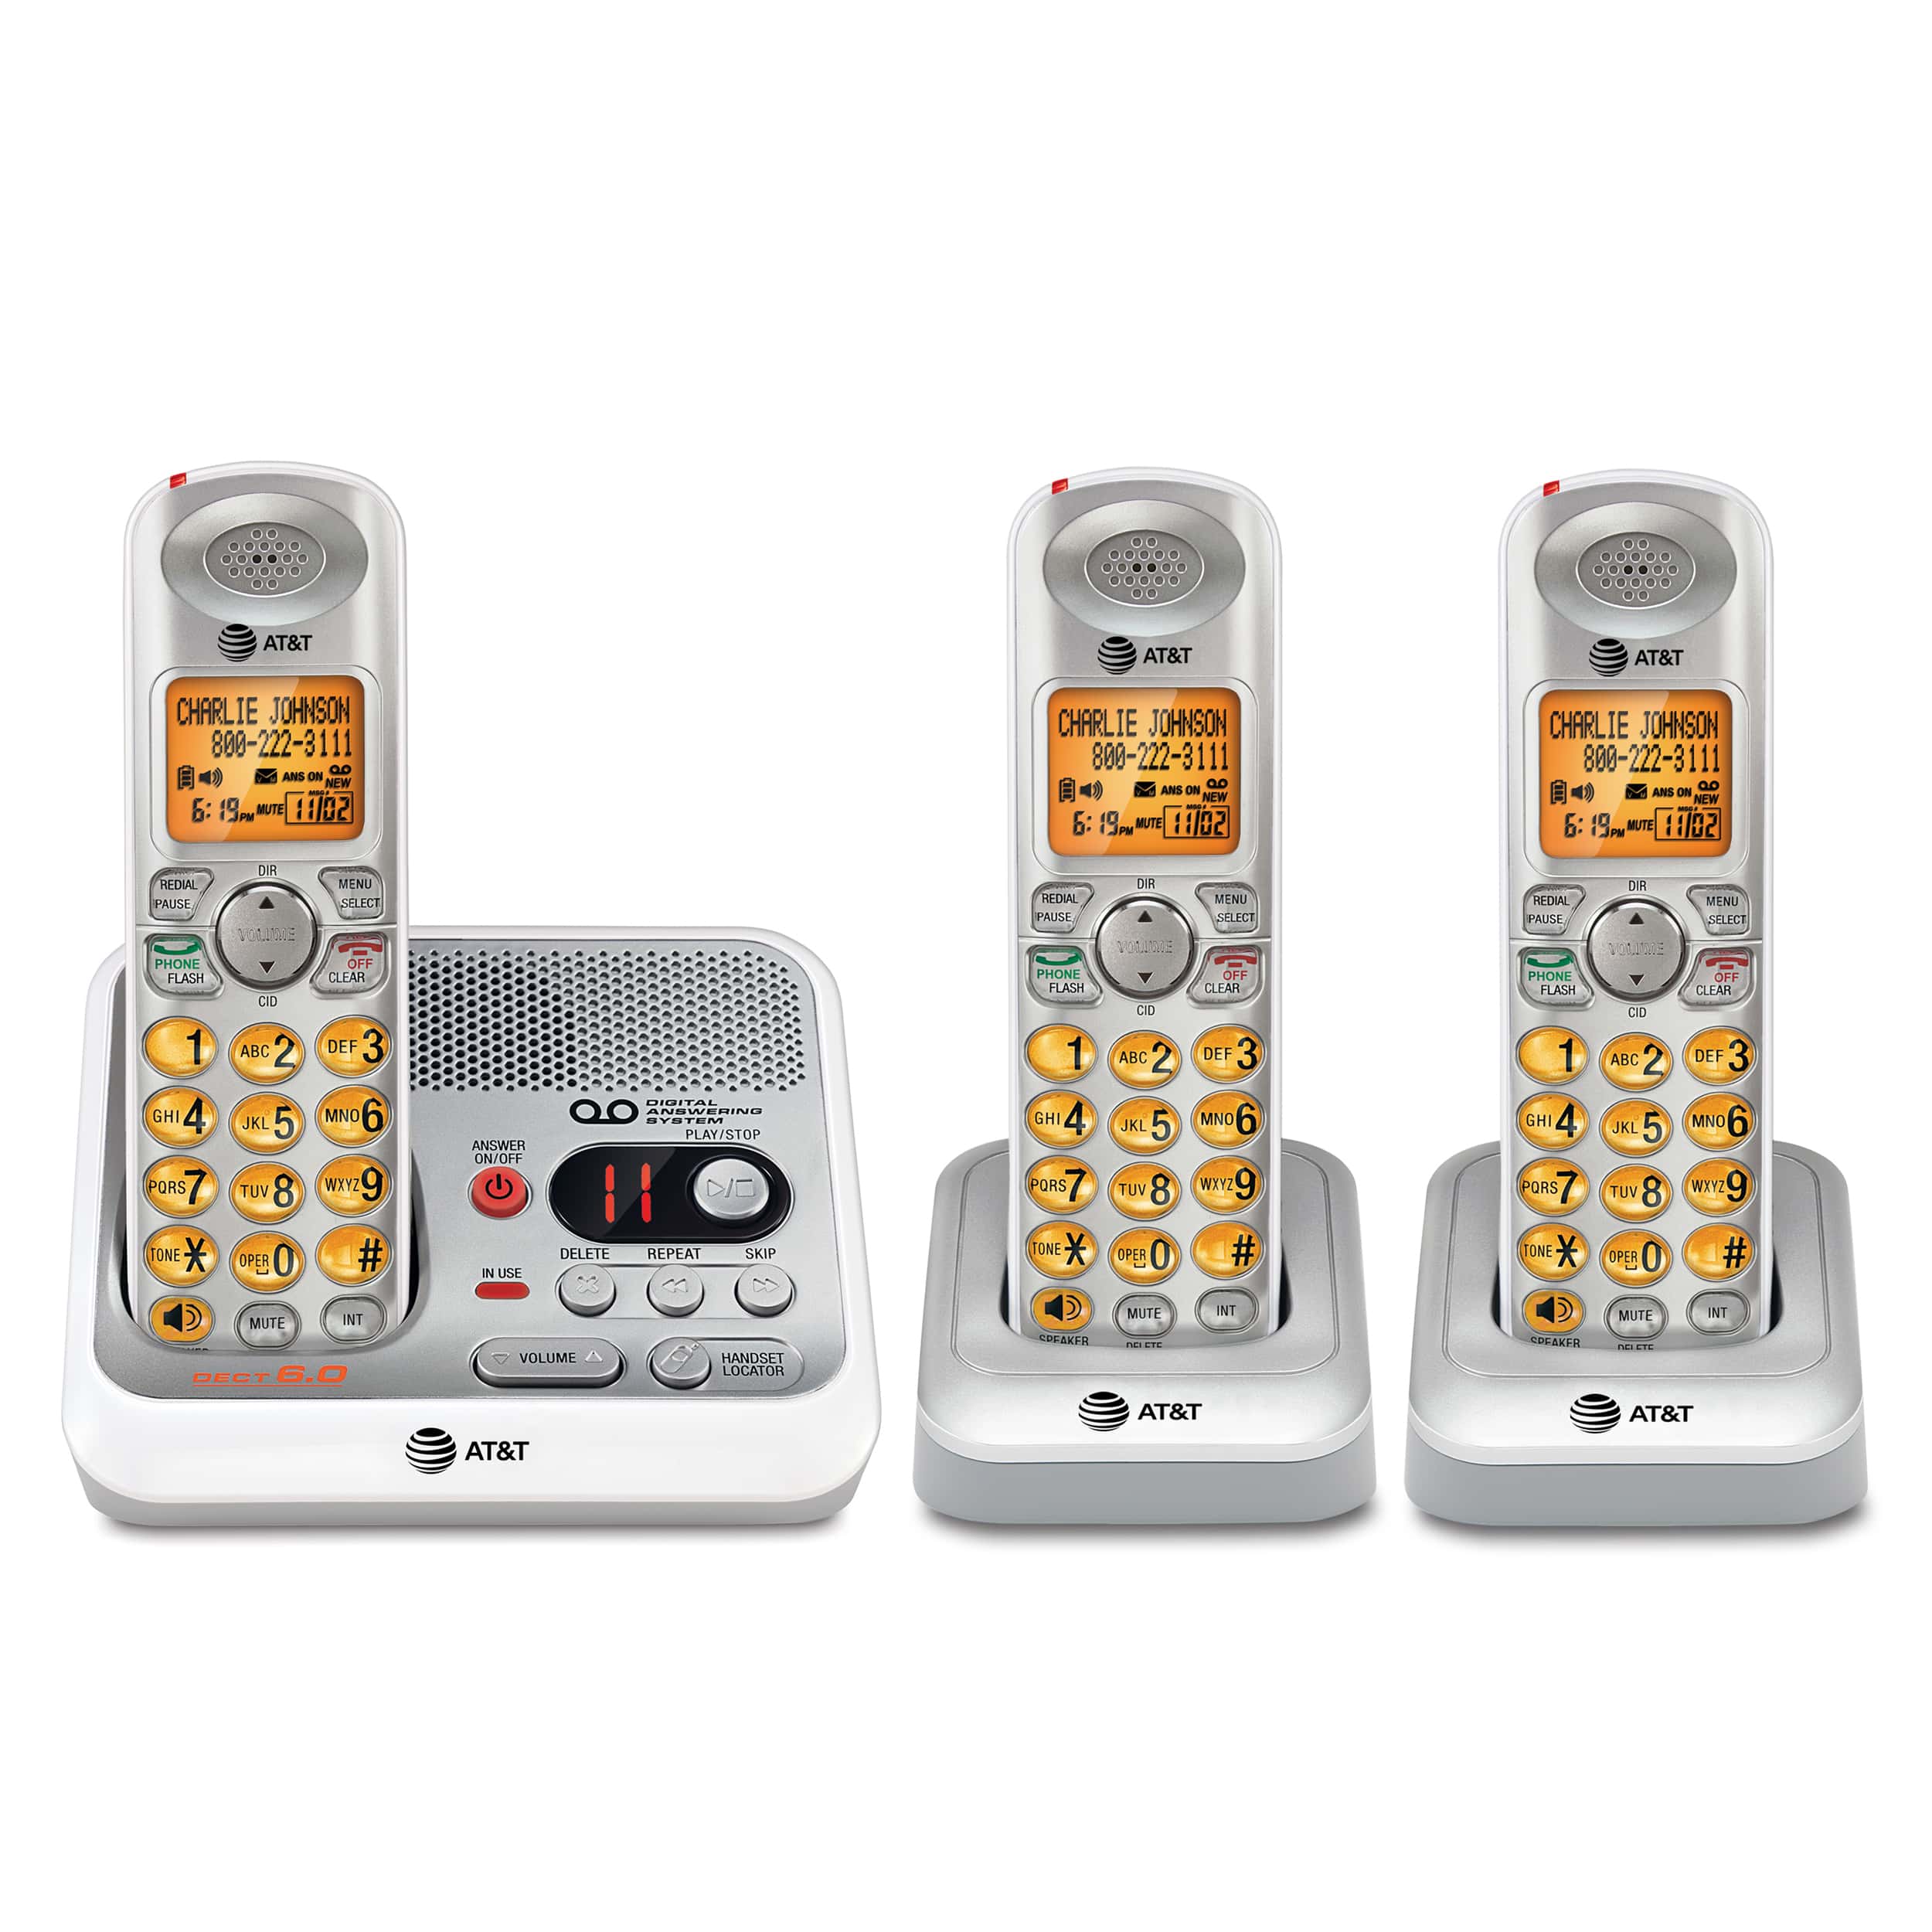 3 handset cordless answering system with caller ID/call waiting - view 1